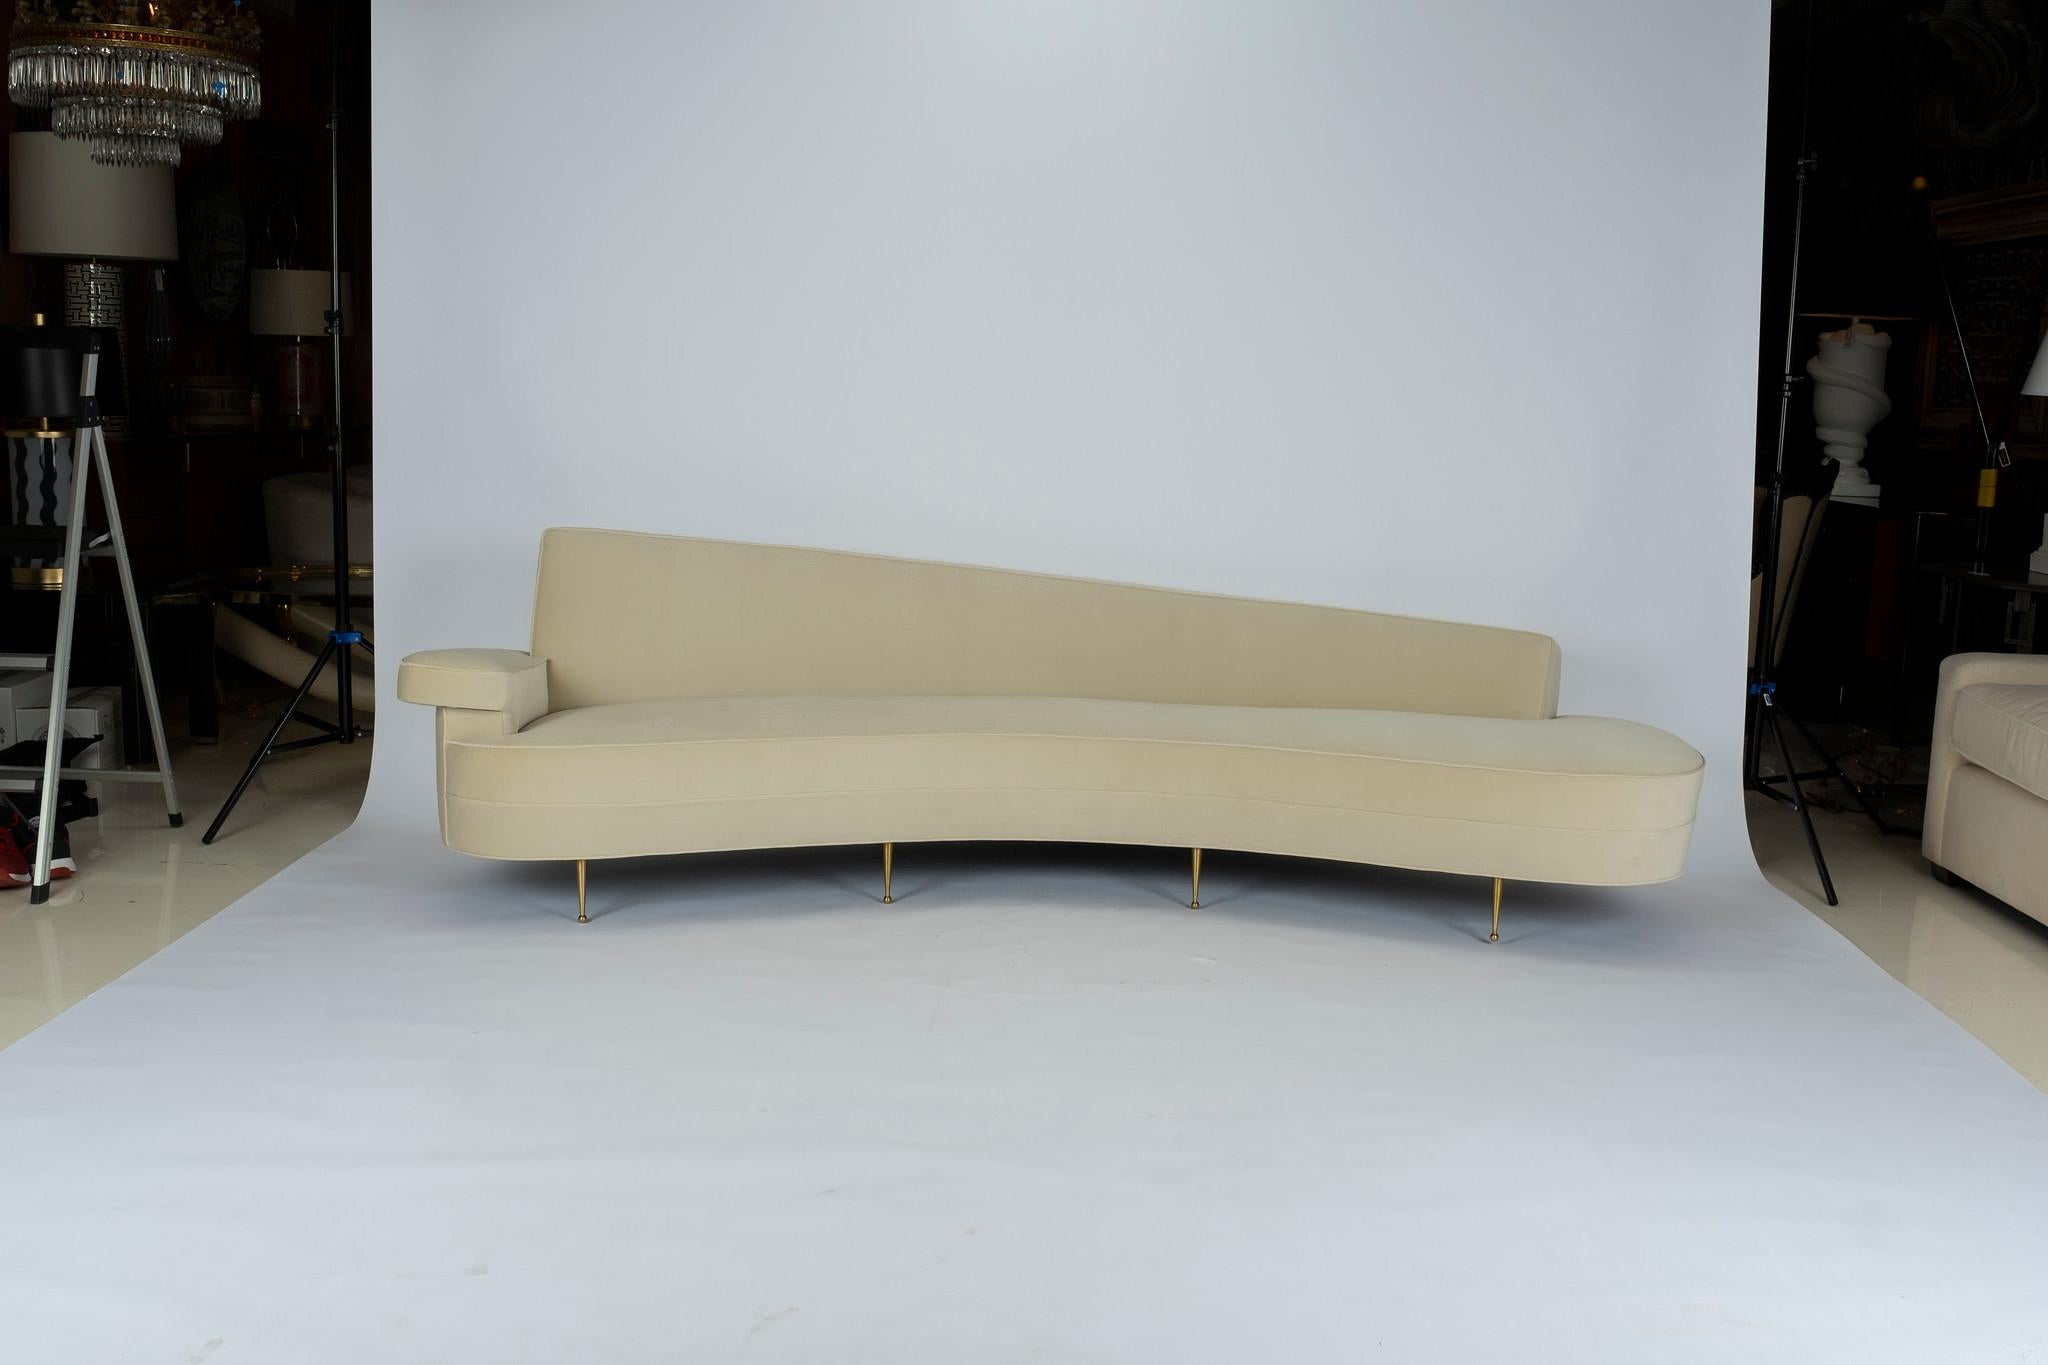 A magnificent asymmetrical right arm curved back sofa upholstered in a creamy ecru velvet. This beautiful sofa is supported by solid brass sabots. We stripped the original 1950s Federico Munari Italian sofa down to its frame and copied it to exact